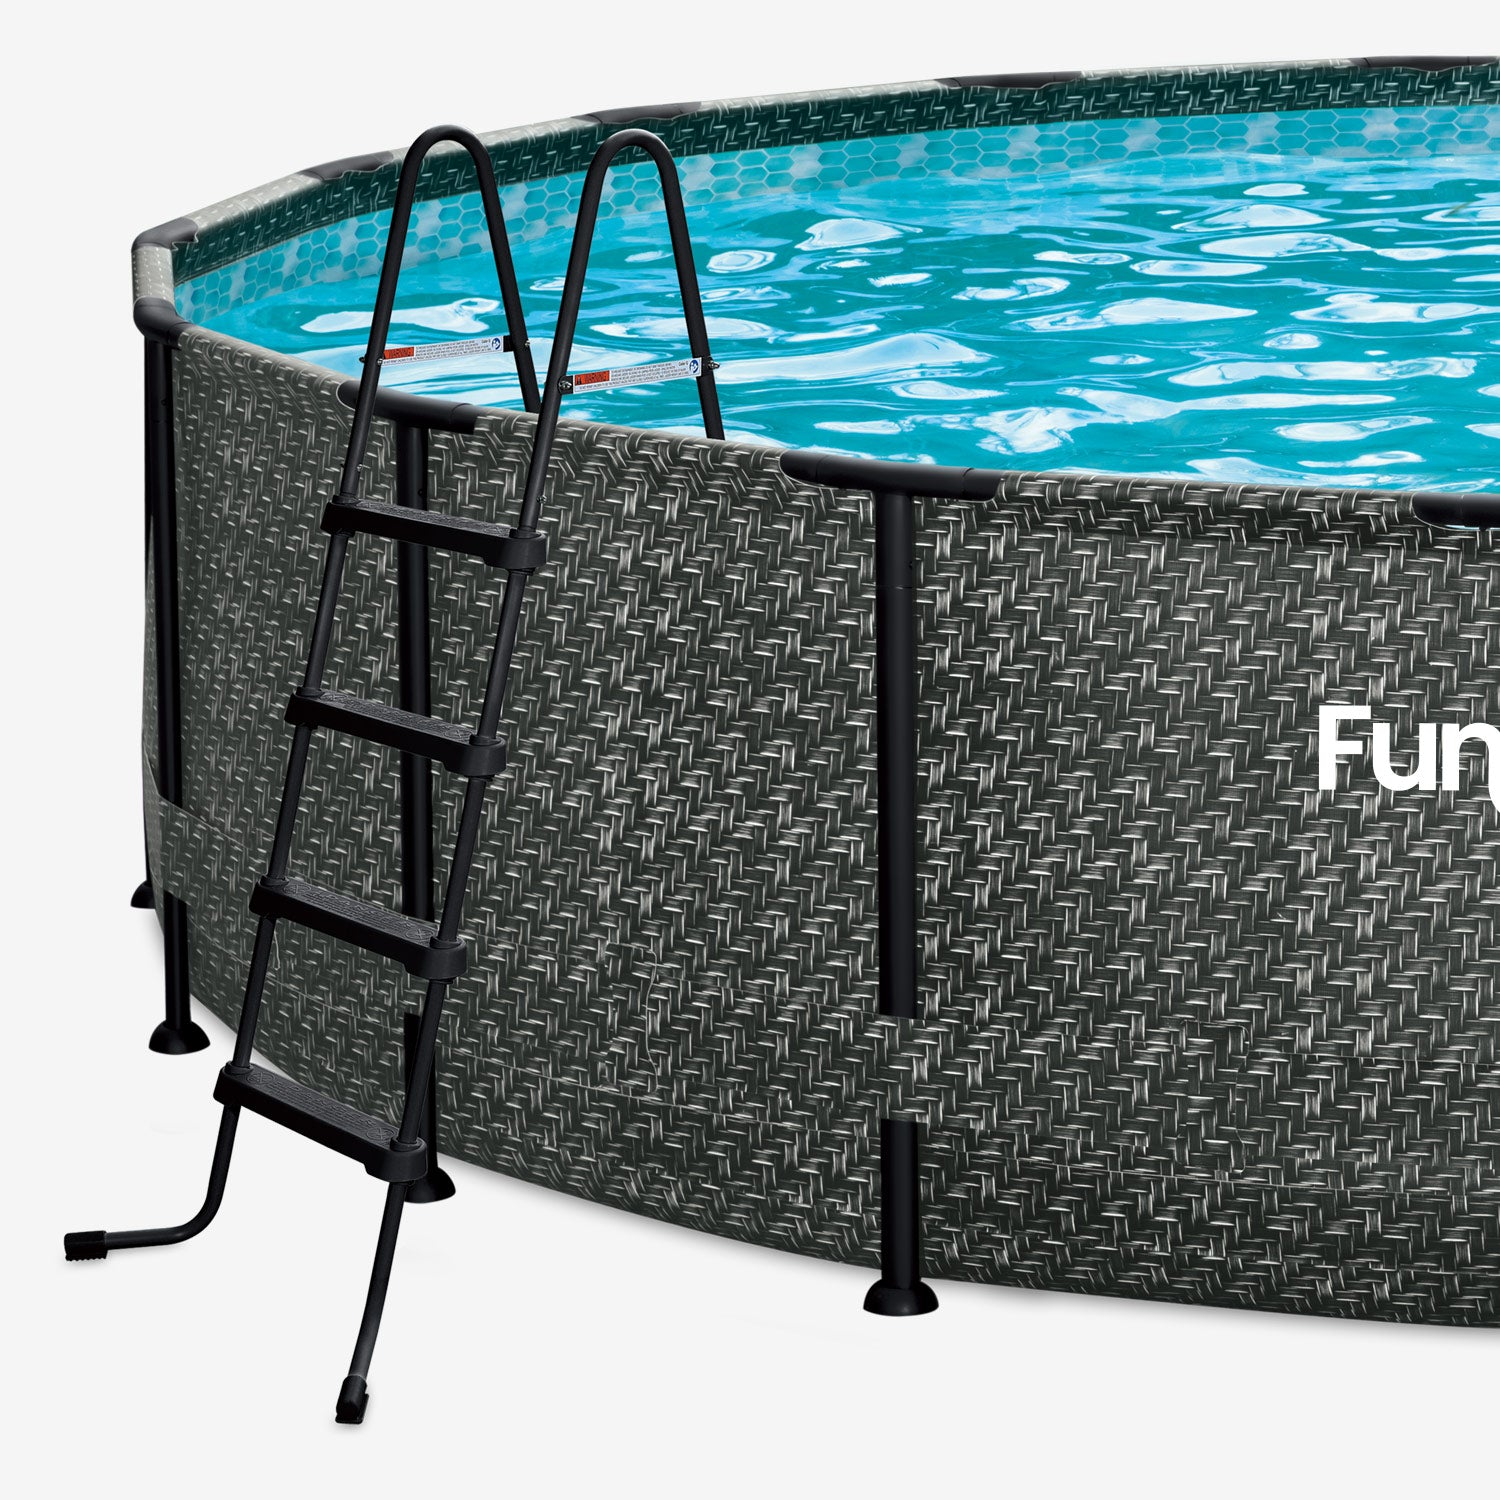 Funsicle 52&quot; SureStep Ladder next to Funsicle Oasis Designer Pool